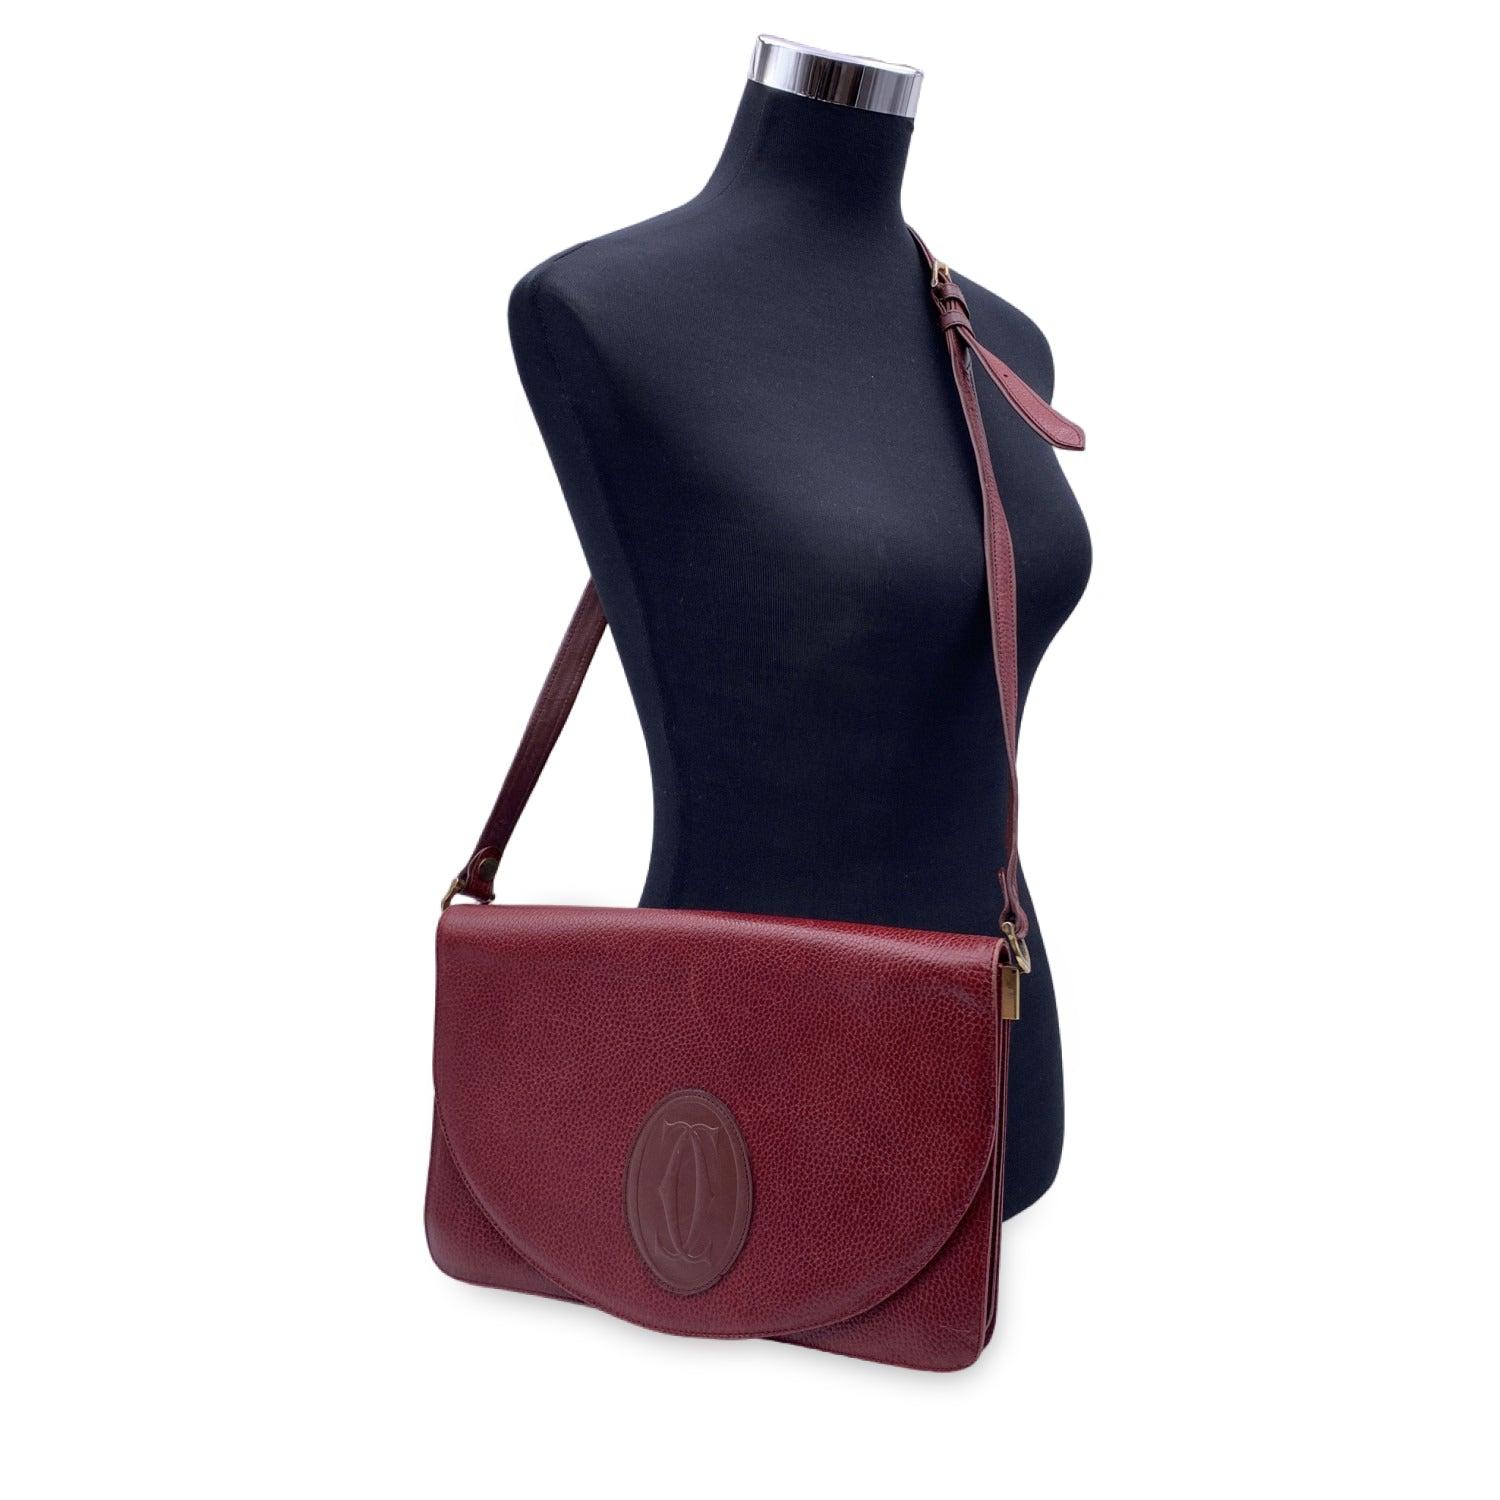 This beautiful Bag will come with a Certificate of Authenticity provided by Entrupy. The certificate will be provided at no further cost CARTIER Paris Vintage shoulder bag in Burgundy genuine leather. Flap with magnetic button closure. Cartier logo